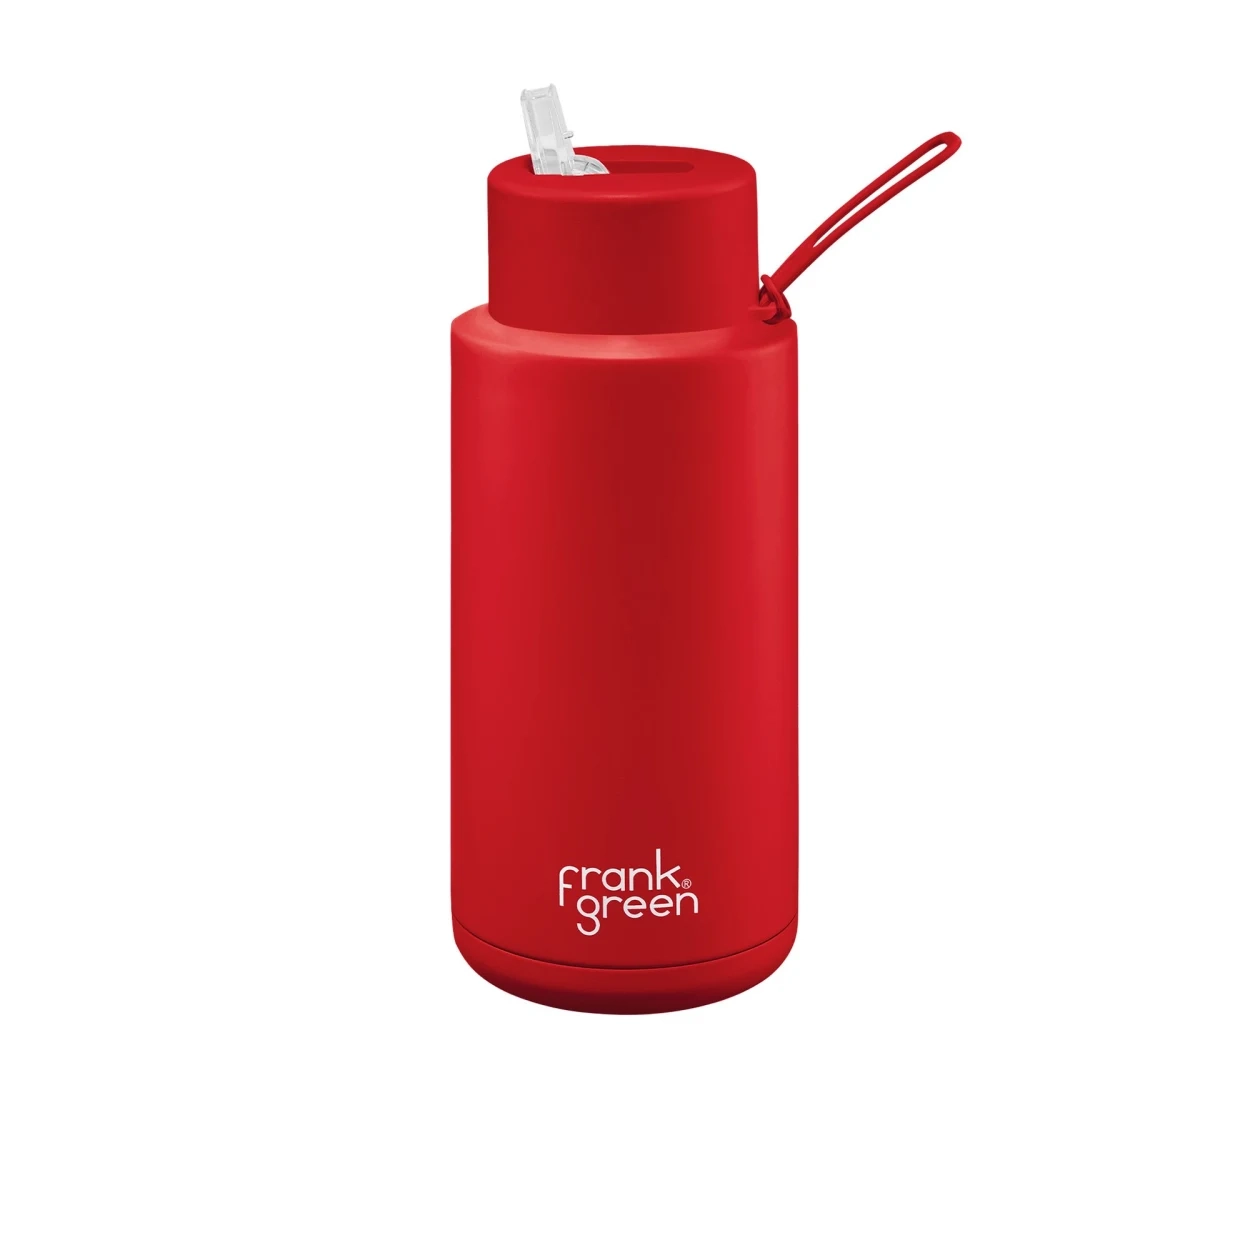 Frank Green Limited Edition Reusable Bottle with Straw 1L (34oz) Atomic Red Image 1